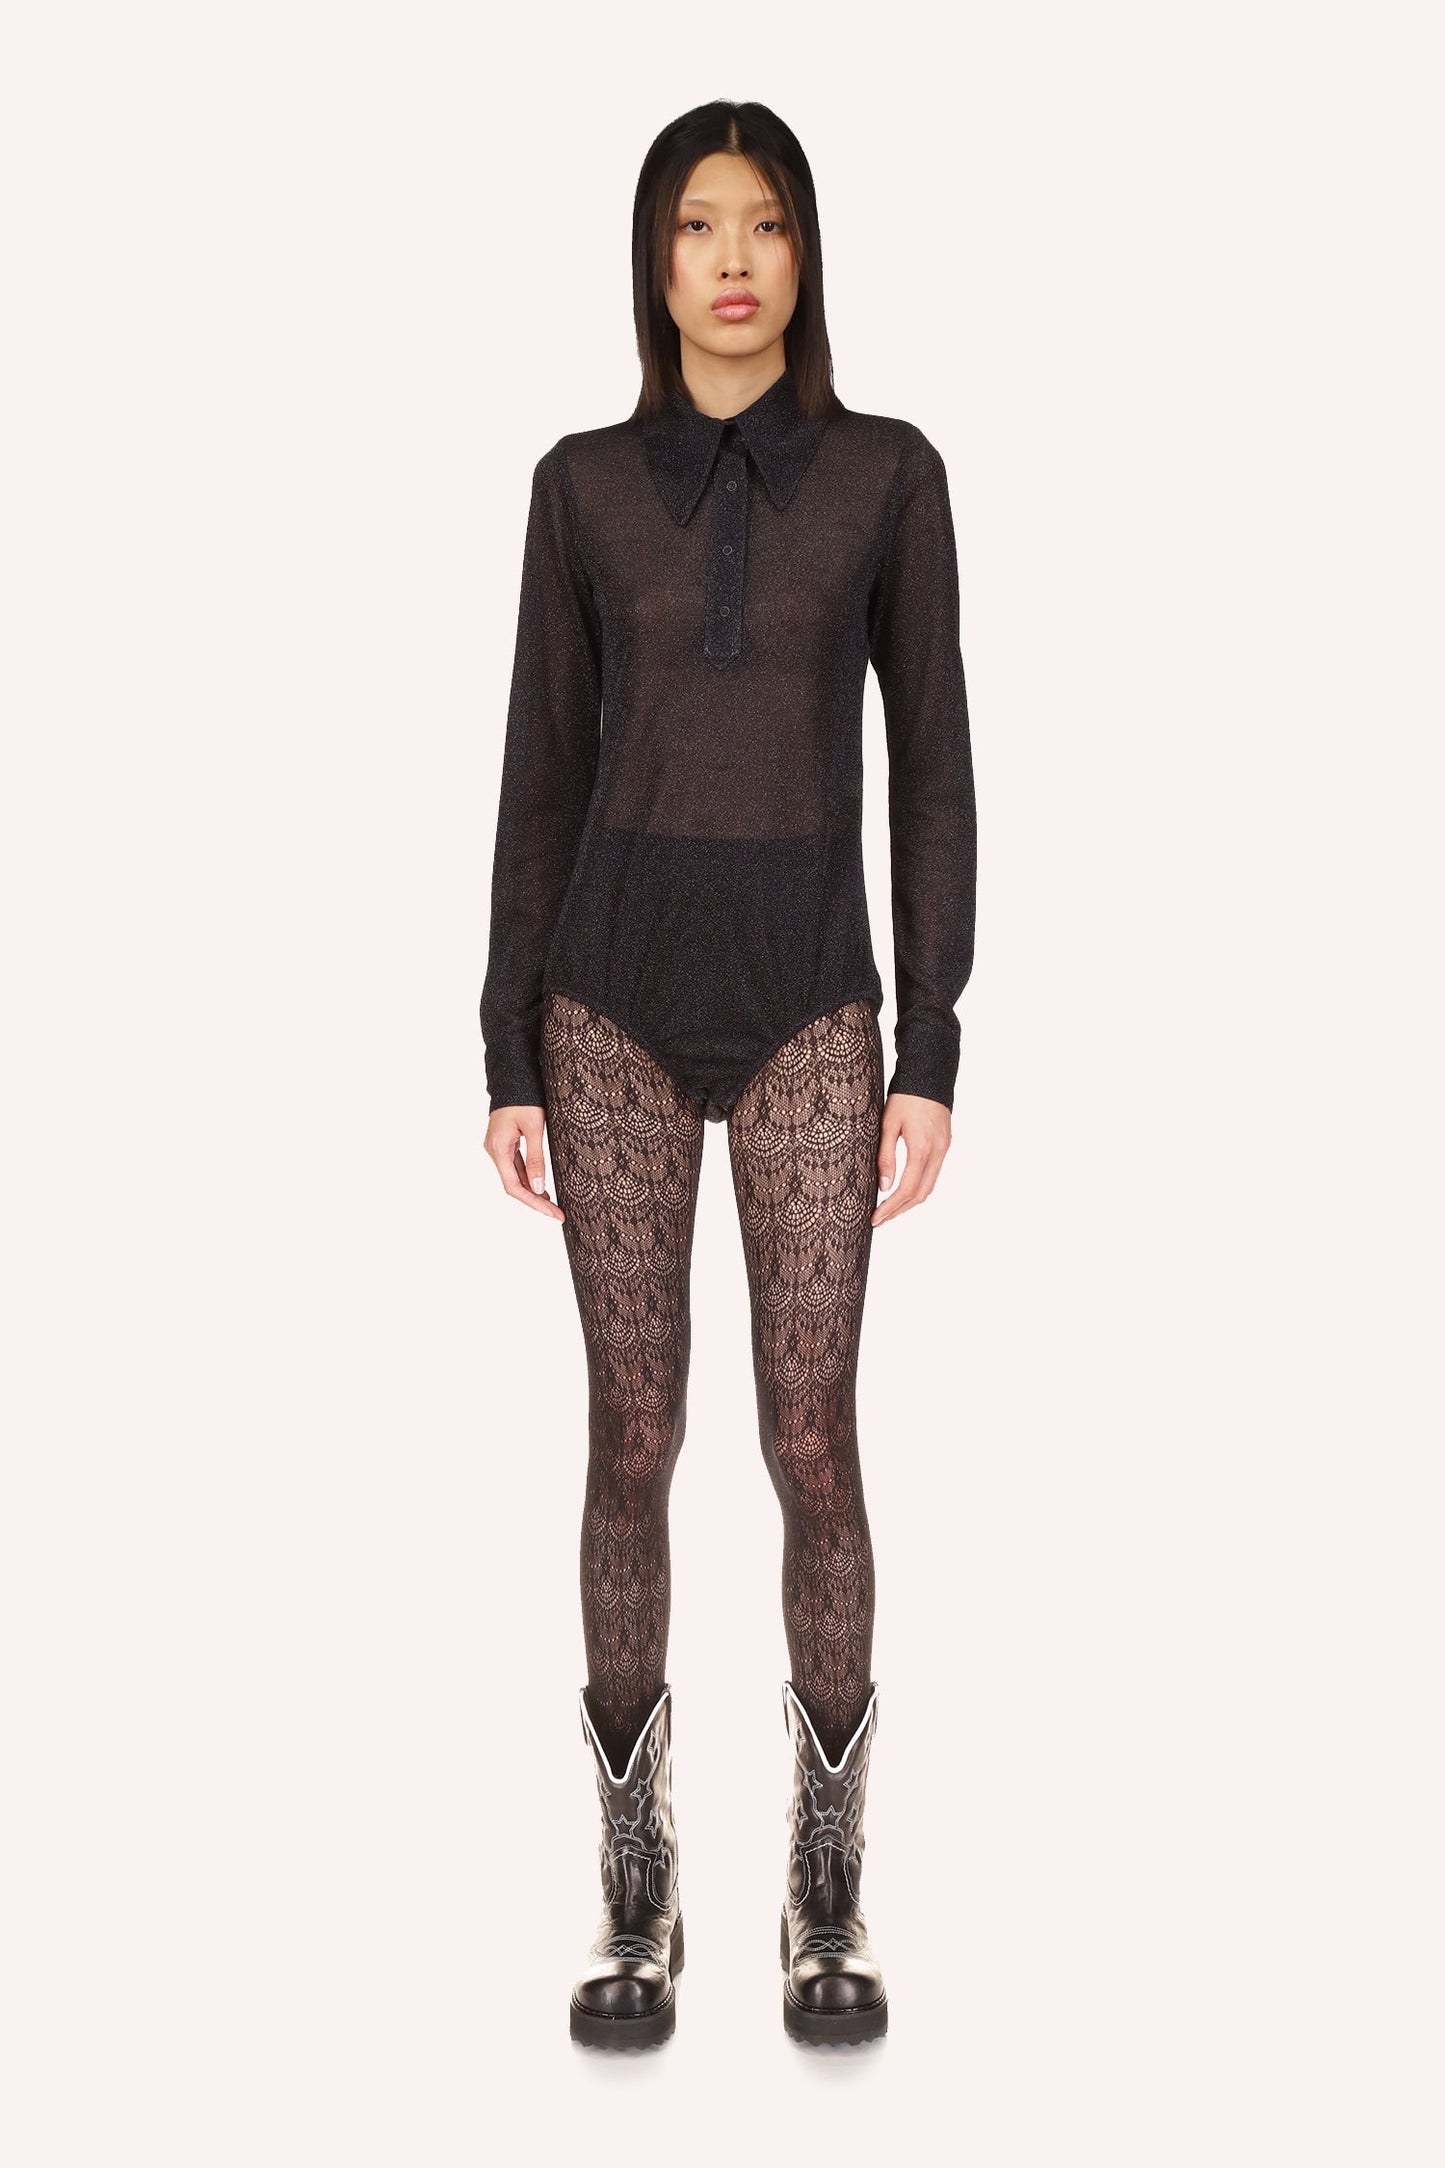 Black see-through material shoulders to hips, long sleeves, large collar closed by 4 buttons